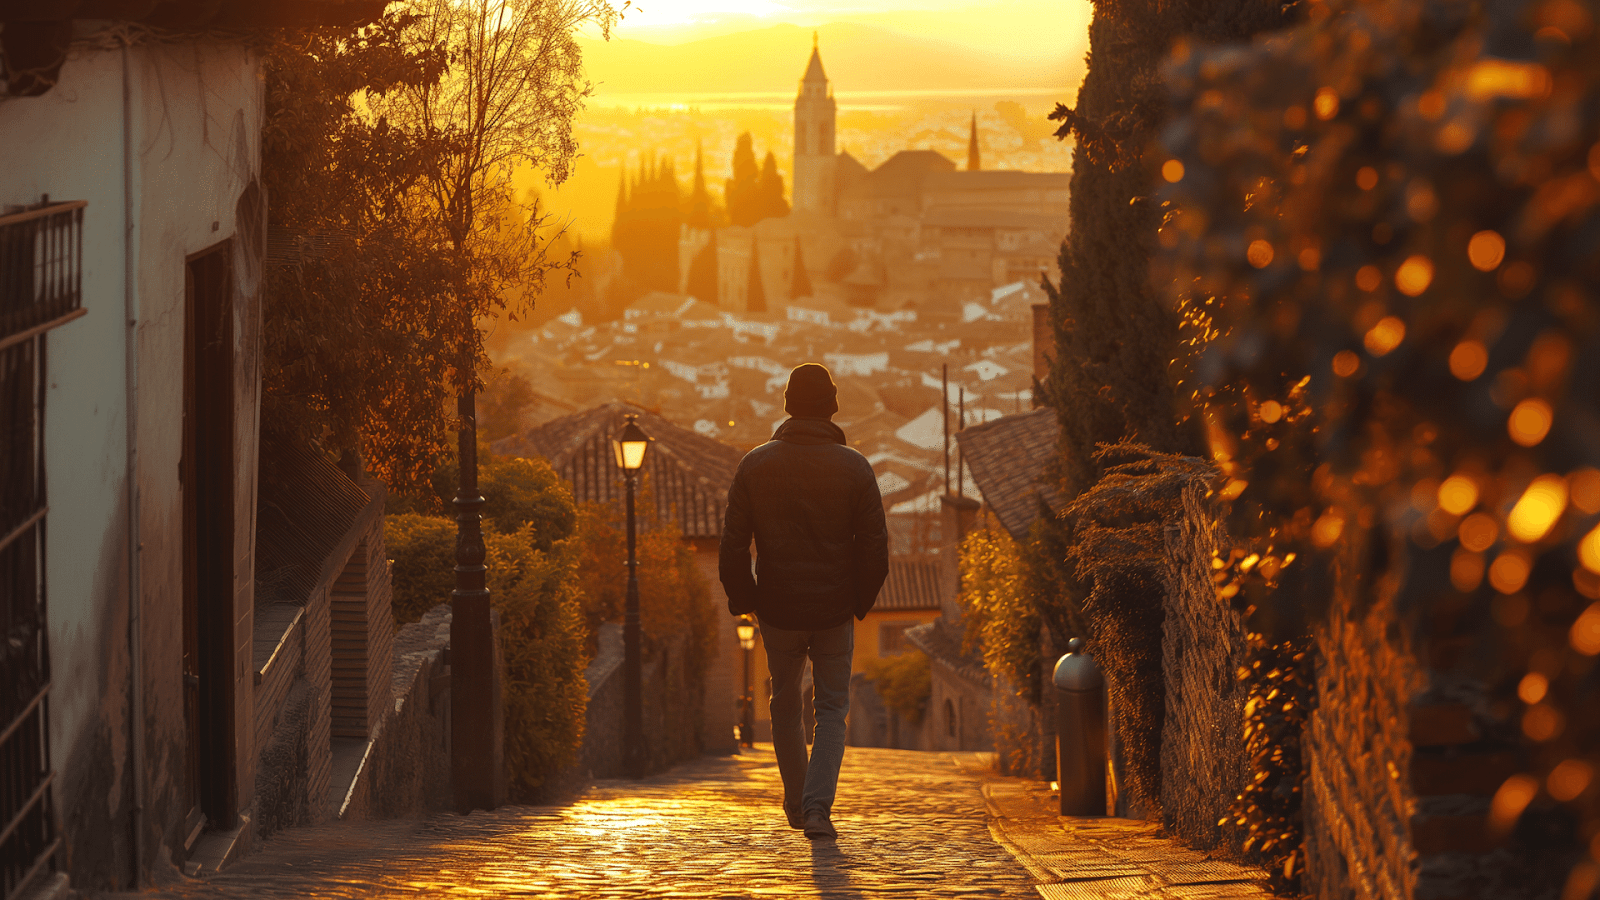 A person walking down a cobblestone street with a stunning sunset backdrop.